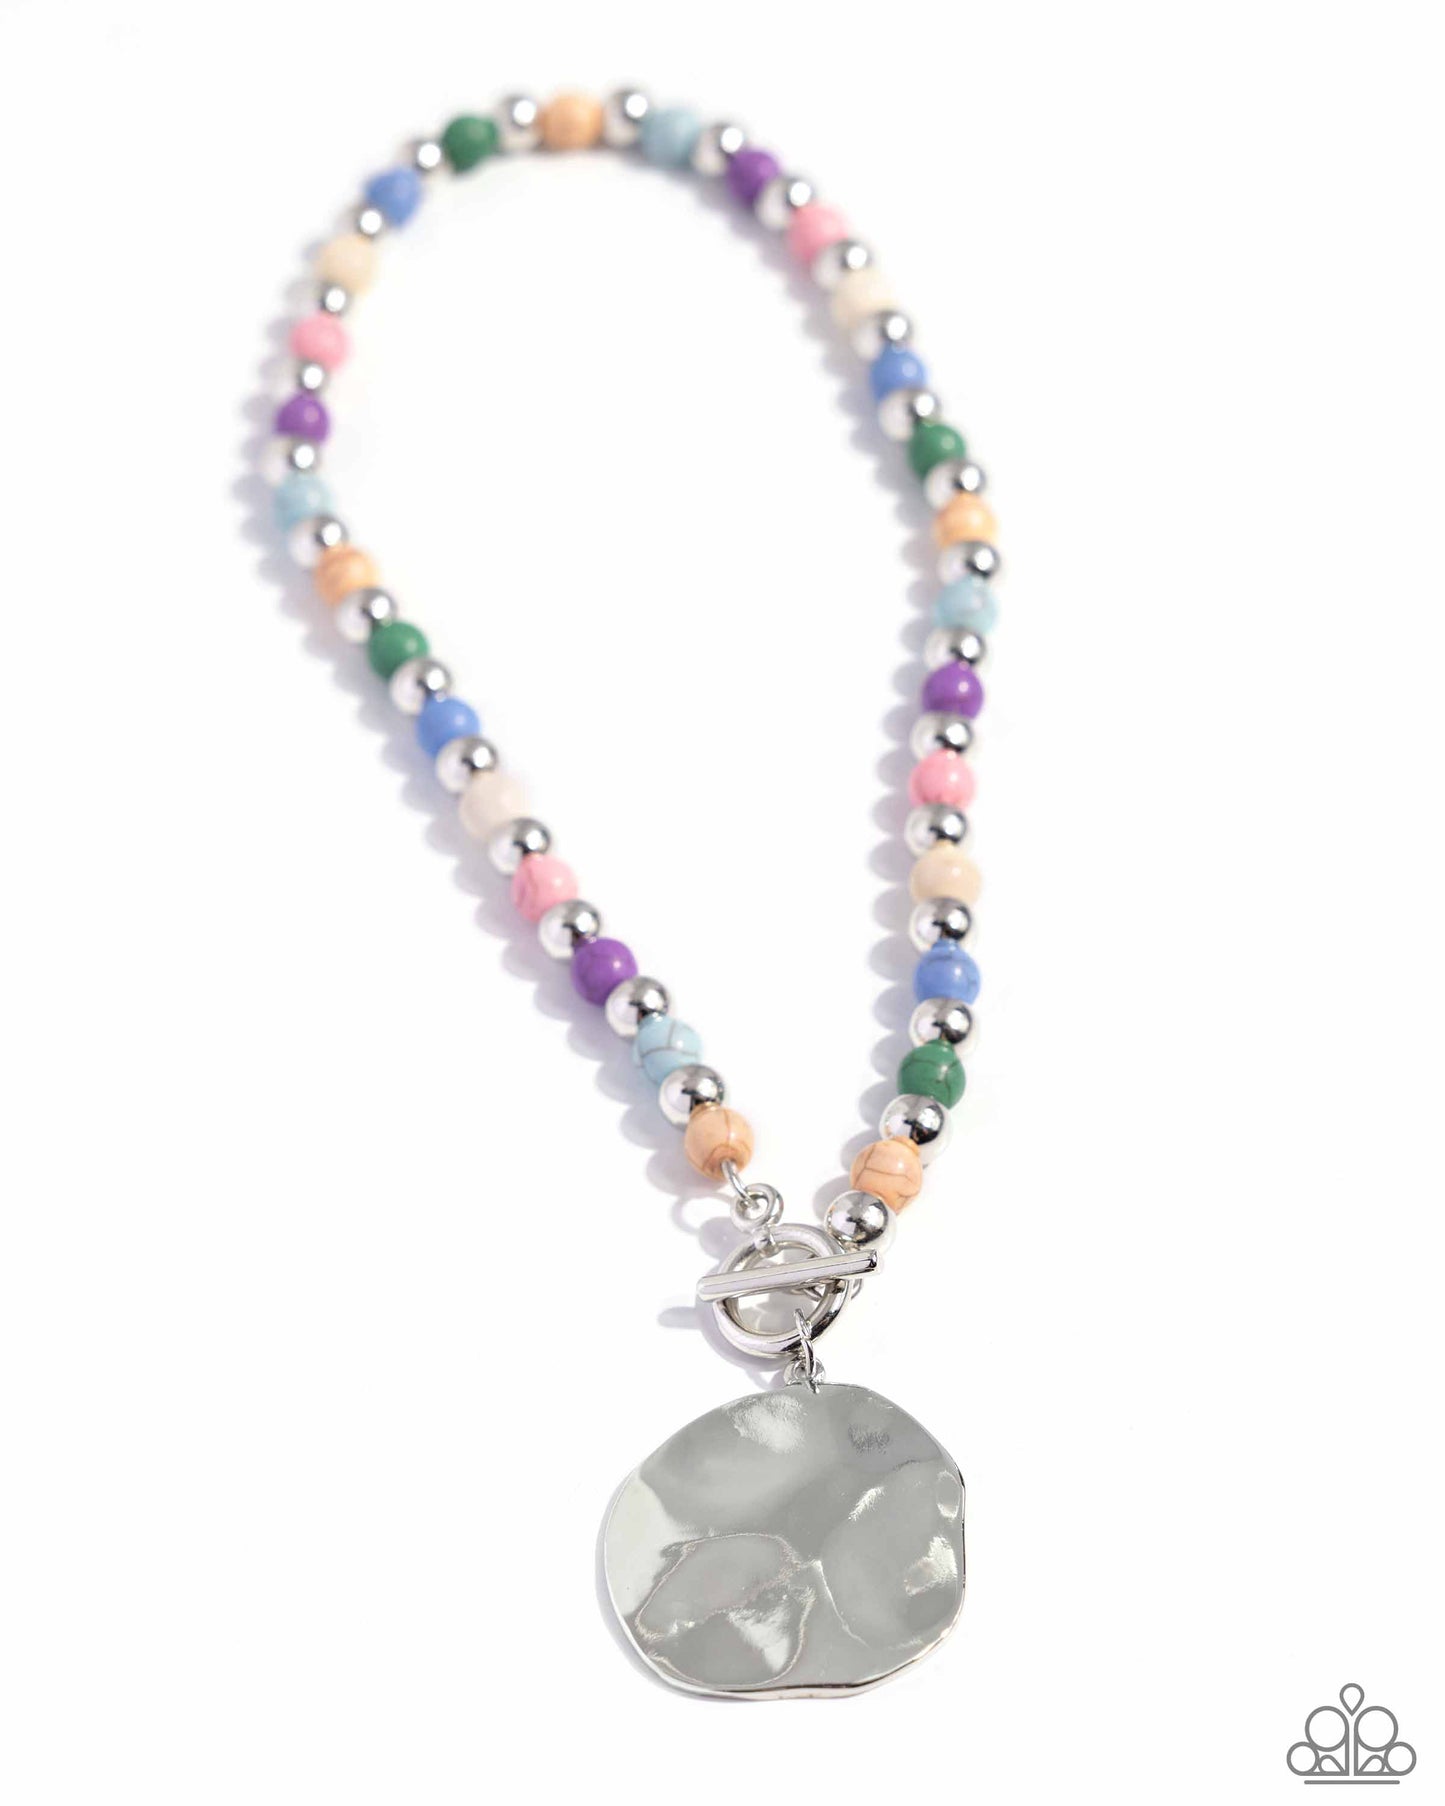 <p>Infused along an invisible string, colorful stones alternate with high-sheen silver beads as they connect through a toggle closure. A hammered oversized concaved silver disc cascades from the colorful strand for additional eye-catching detail. Features a toggle closure. As the stone elements in this piece are natural, some color variation is normal.</p> <p><i> Sold as one individual necklace. Includes one pair of matching earrings.</i></p>